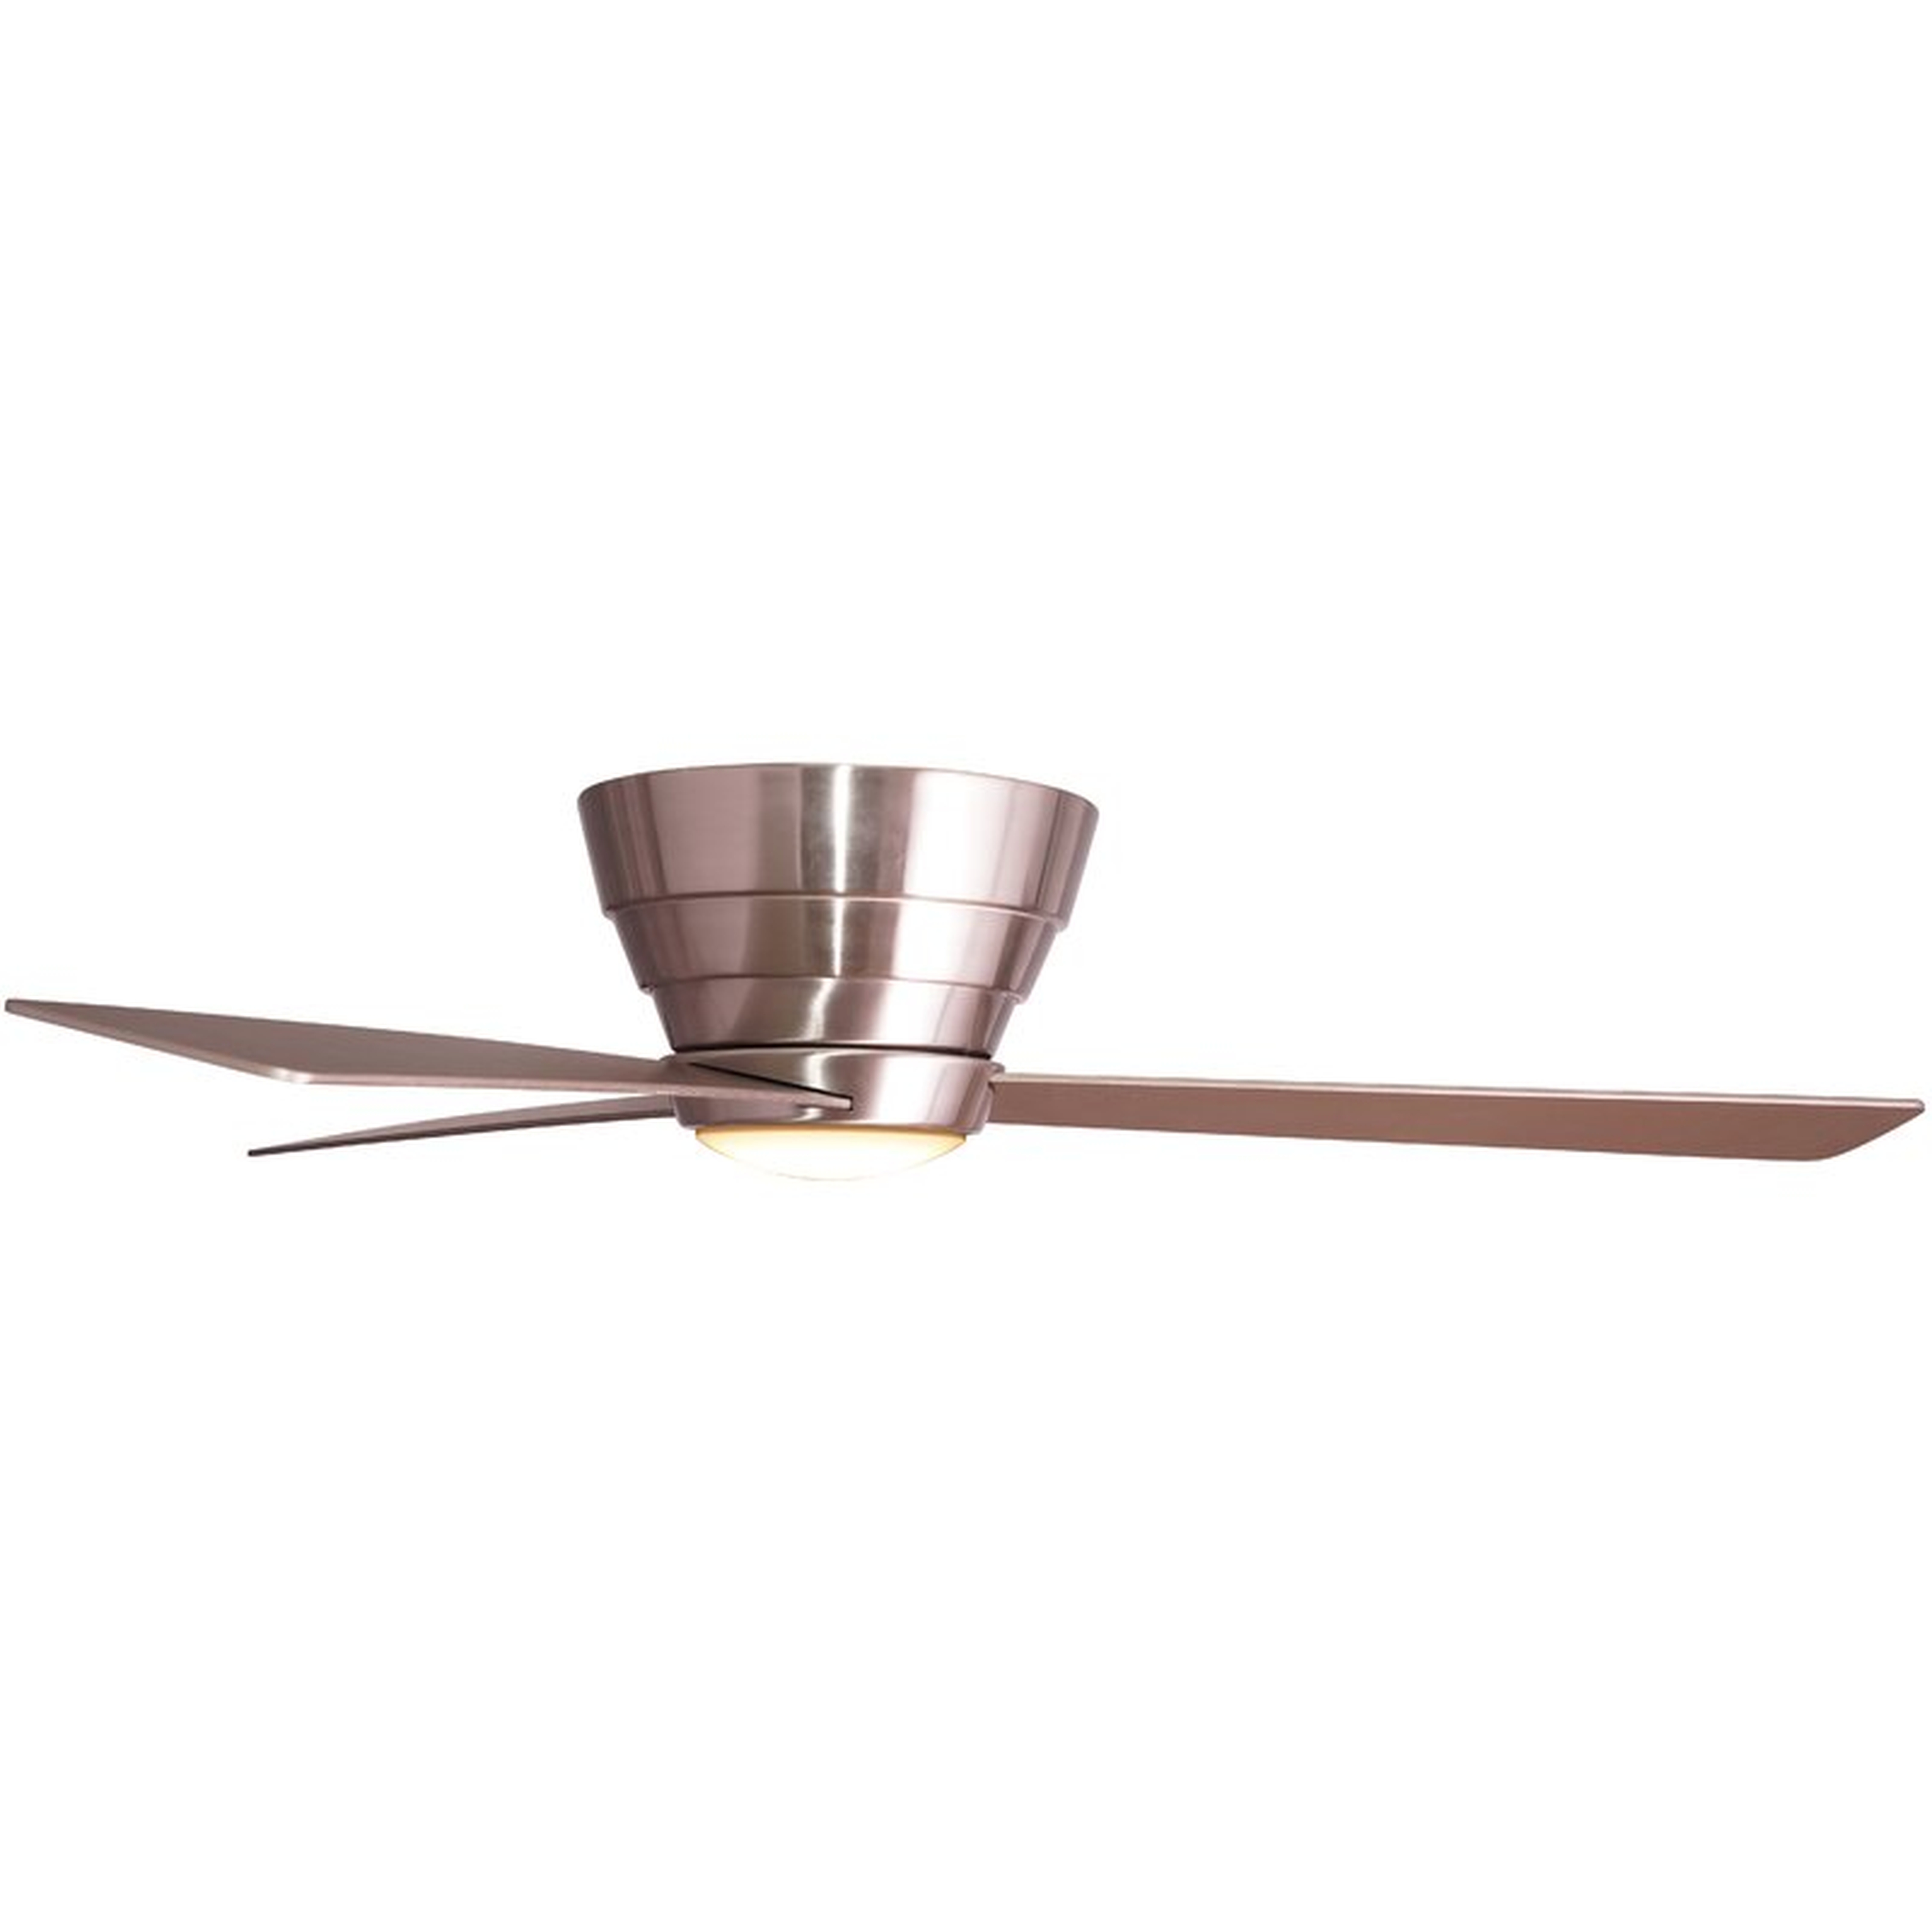 Stainless Steel with Silver Blades 54" Malik 3 Blade LED Ceiling Fan with Remote, Light Kit Included - Wayfair